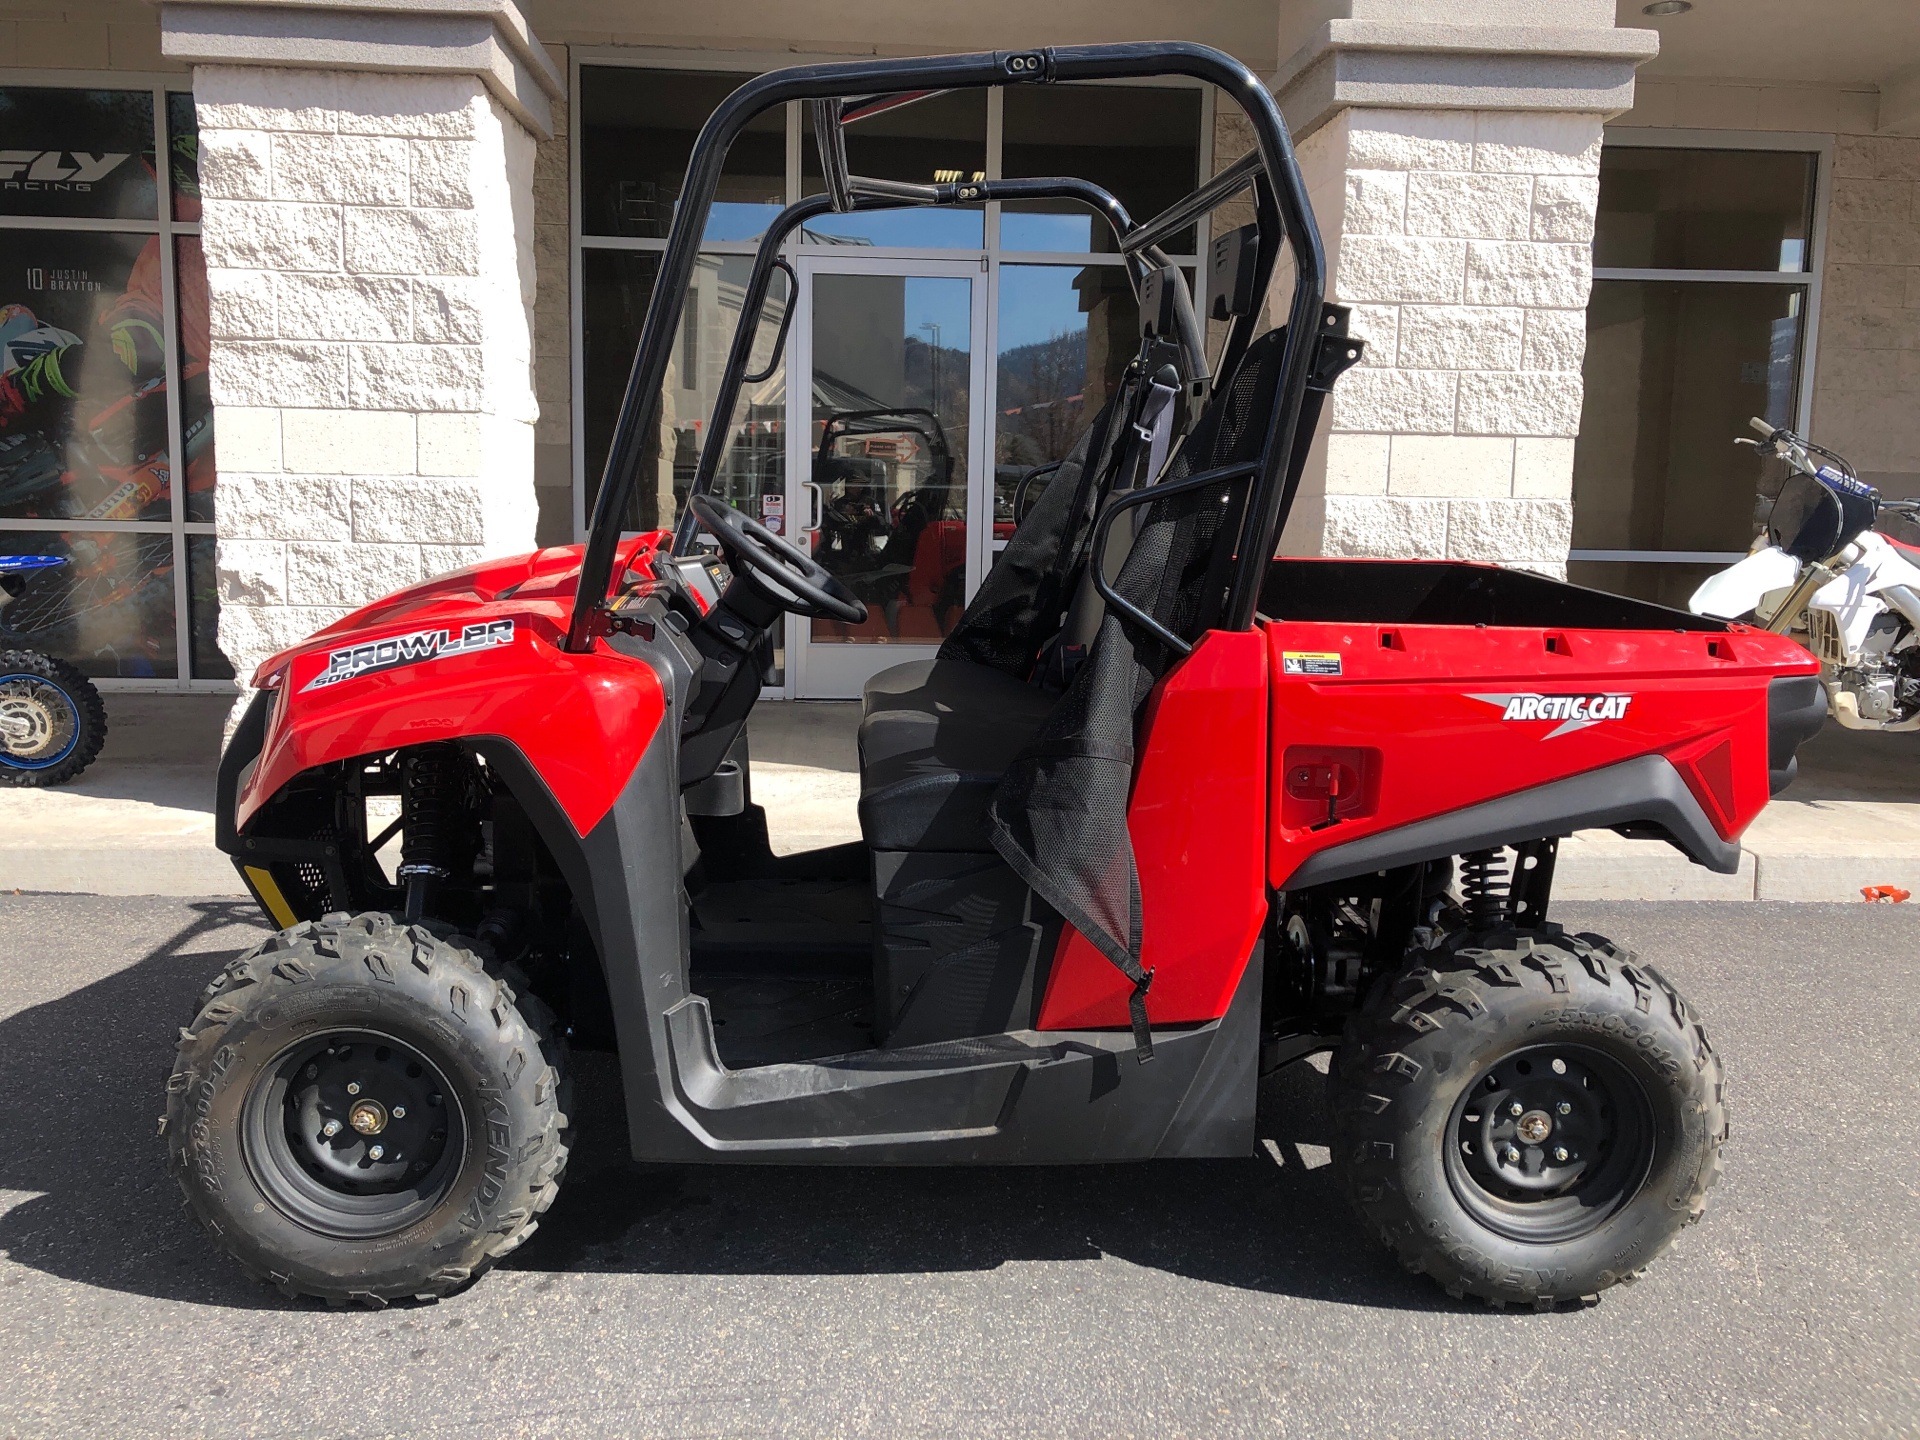 New 2020 Arctic Cat Prowler 500 Utility Vehicles in Carson City, NV